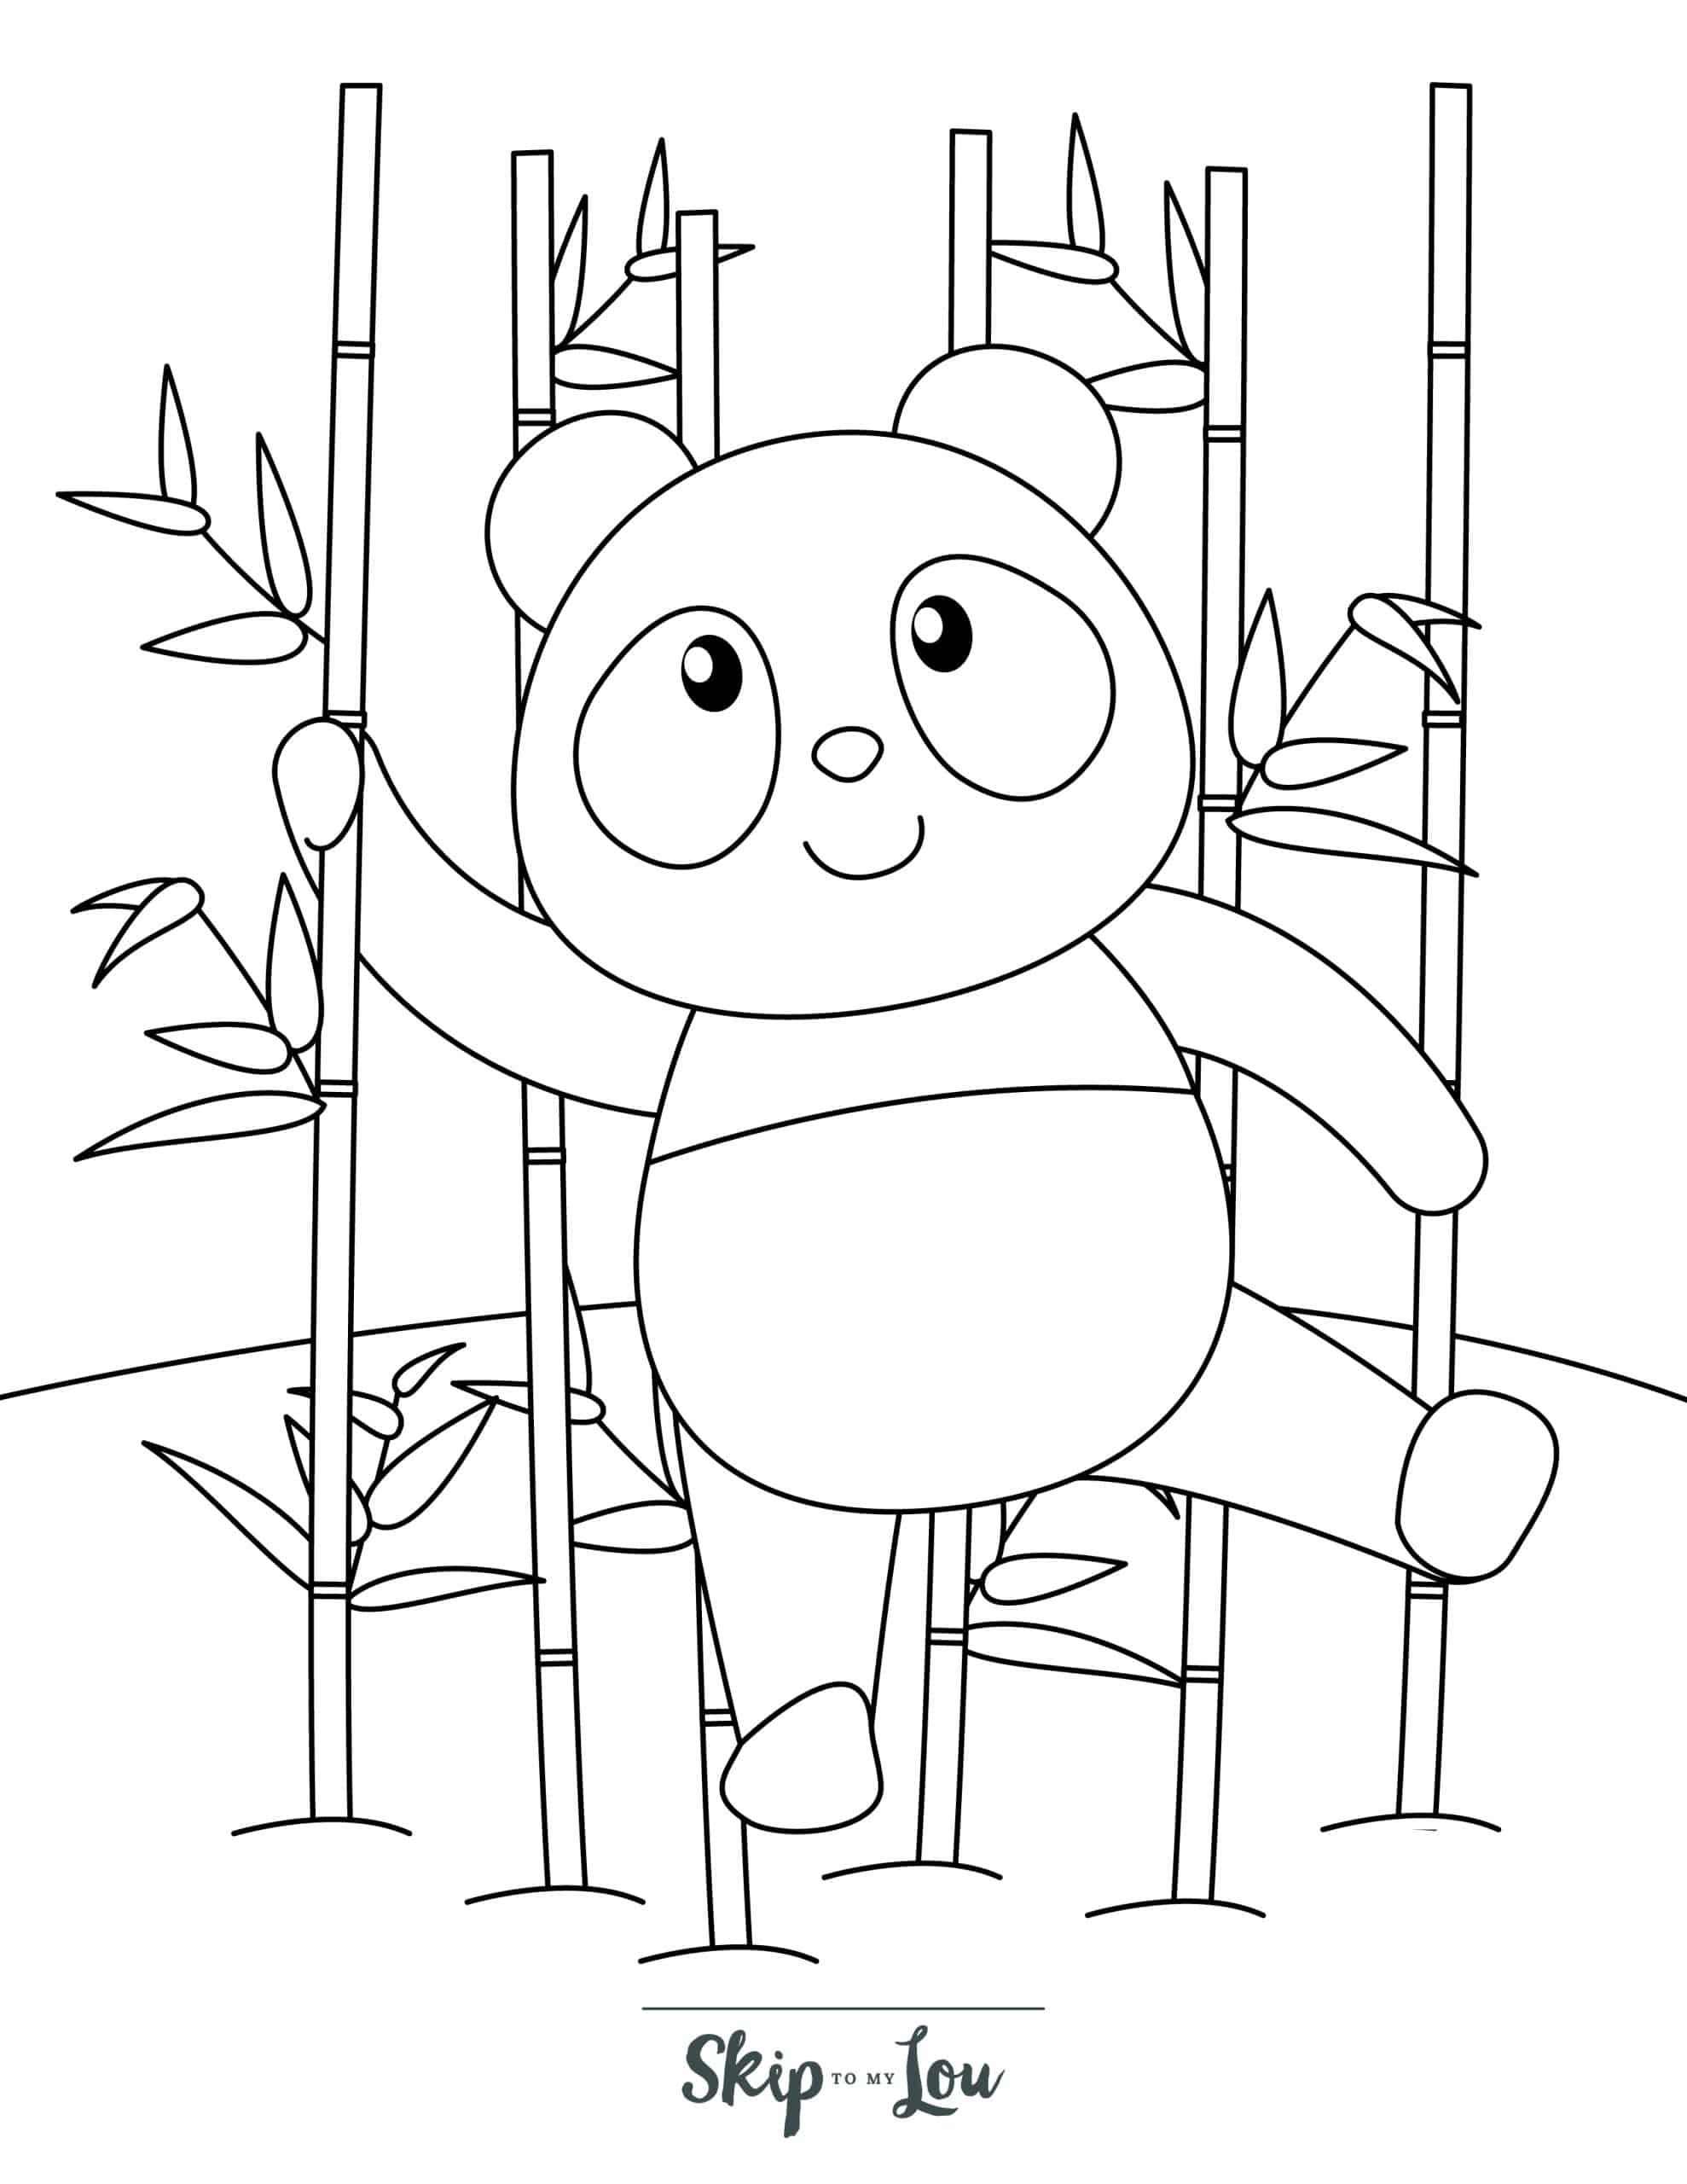 Free printable panda coloring pages for kids skip to my lou